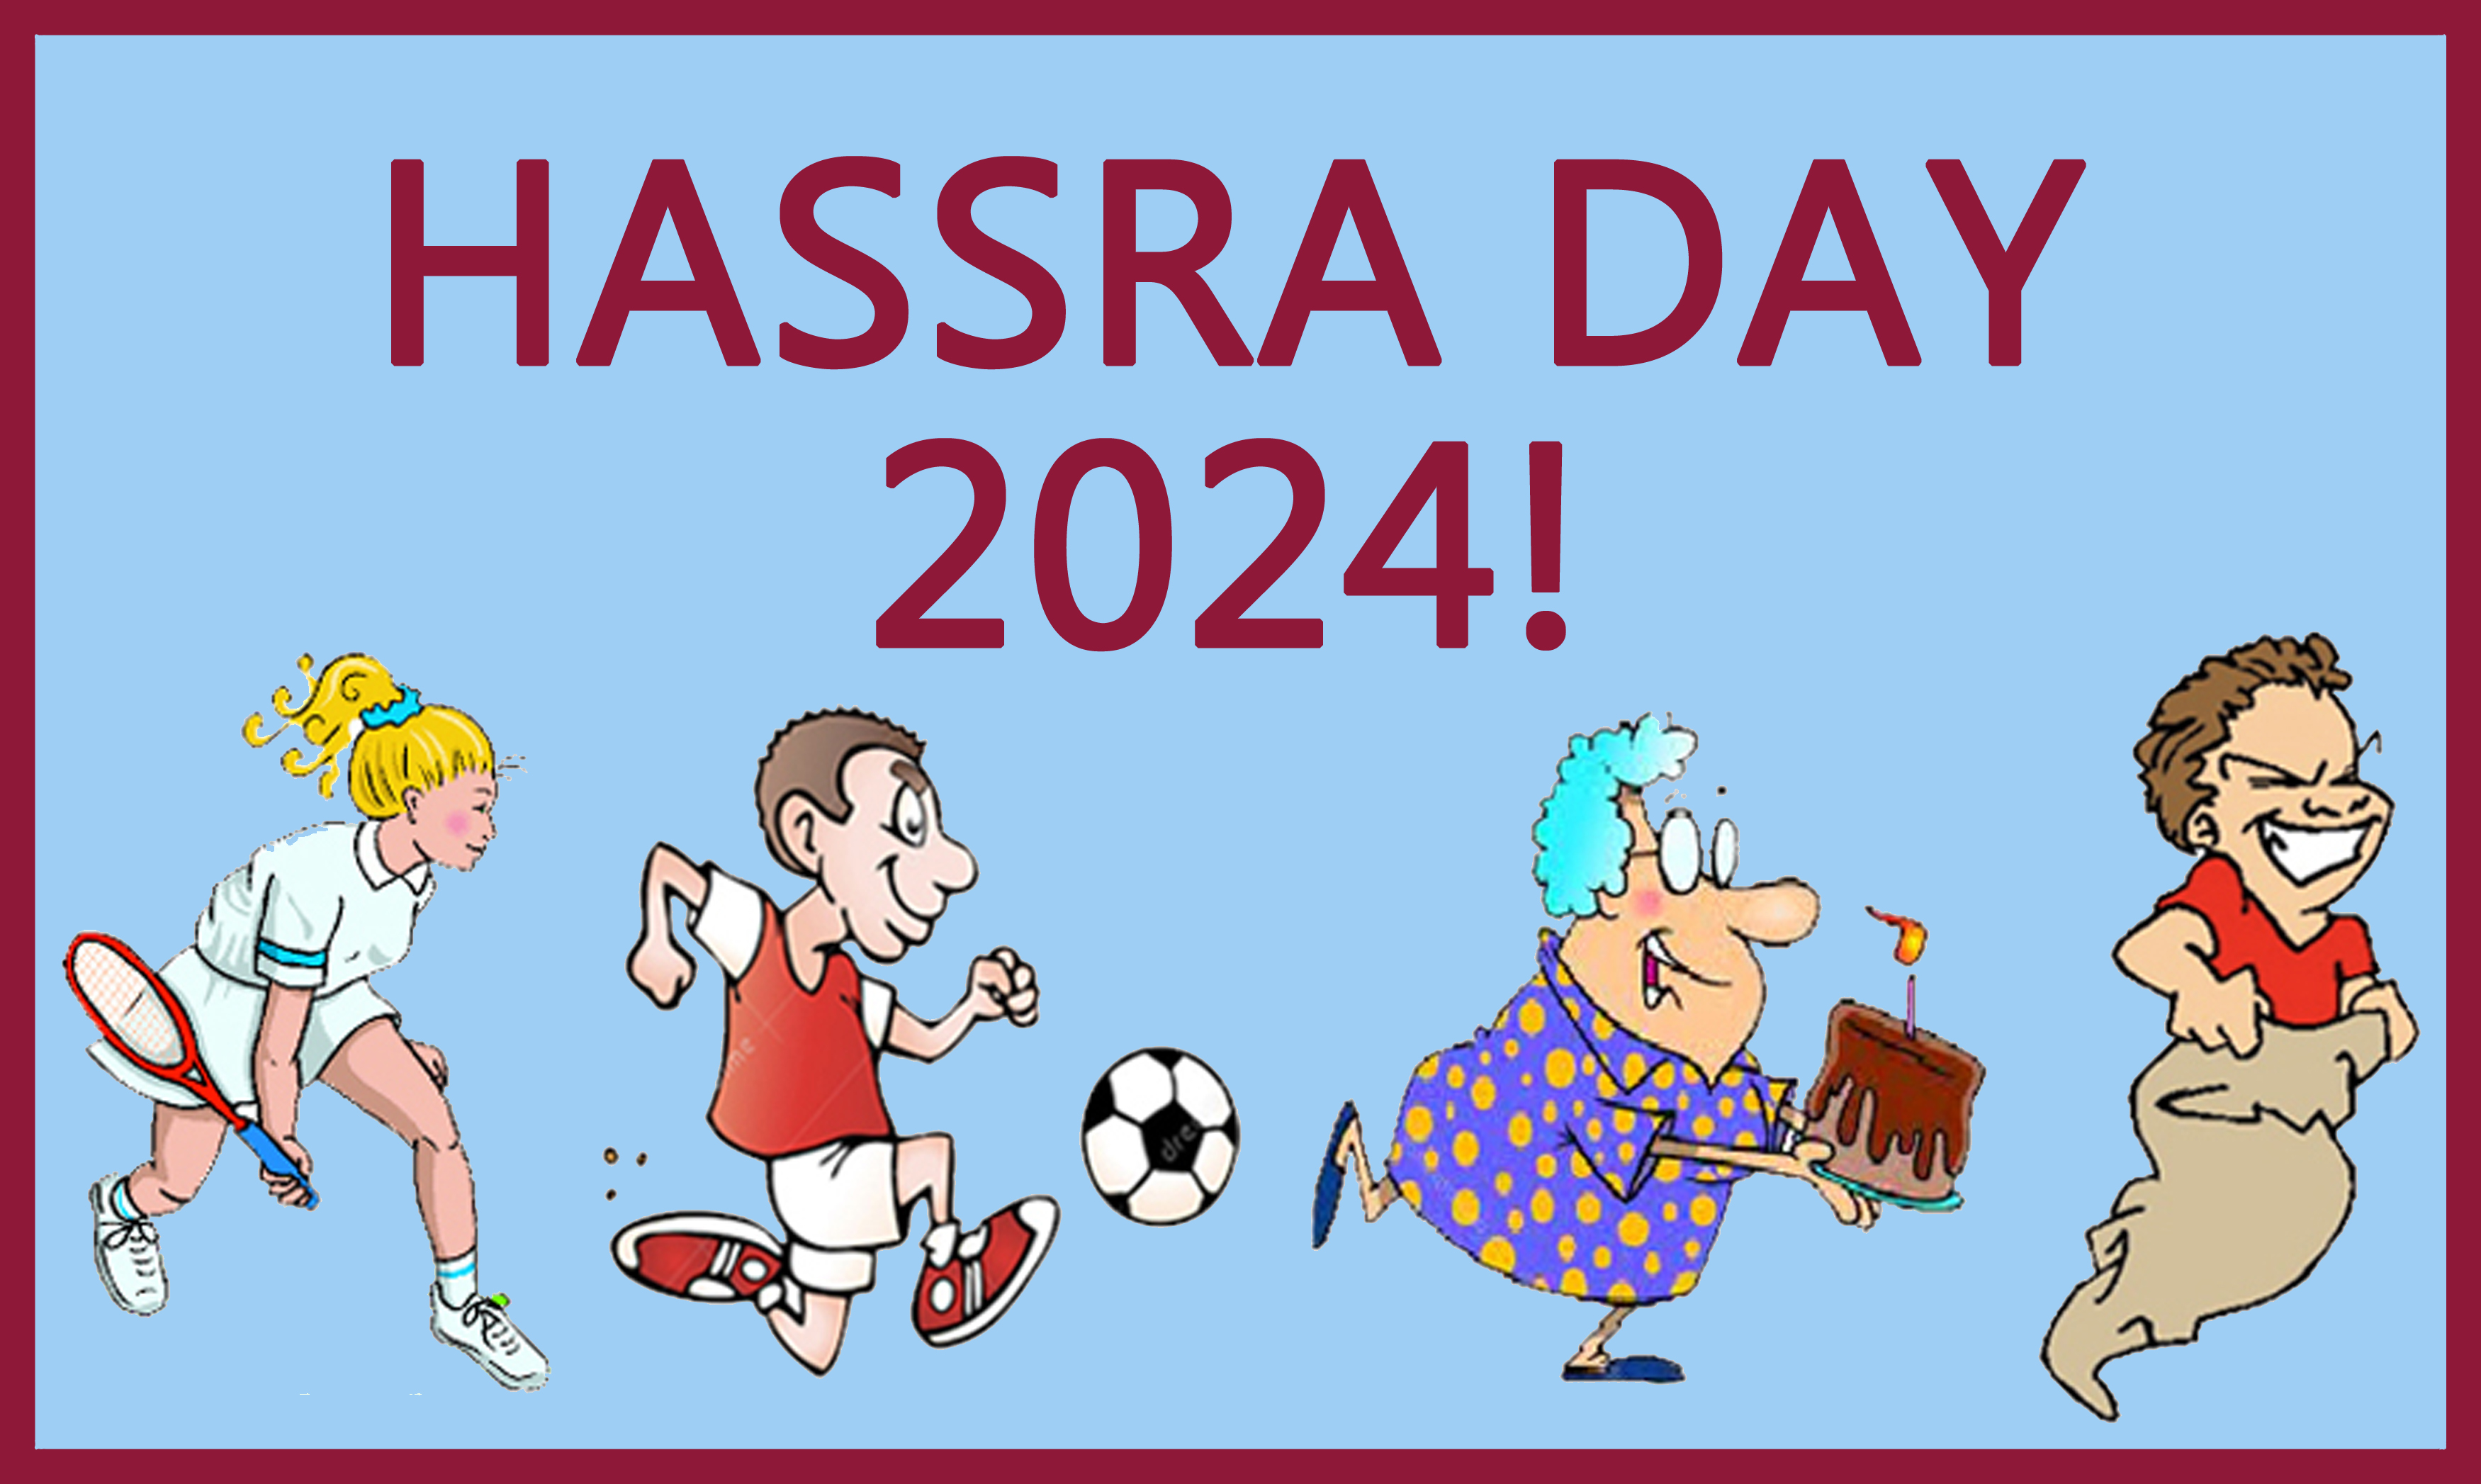 hassra day